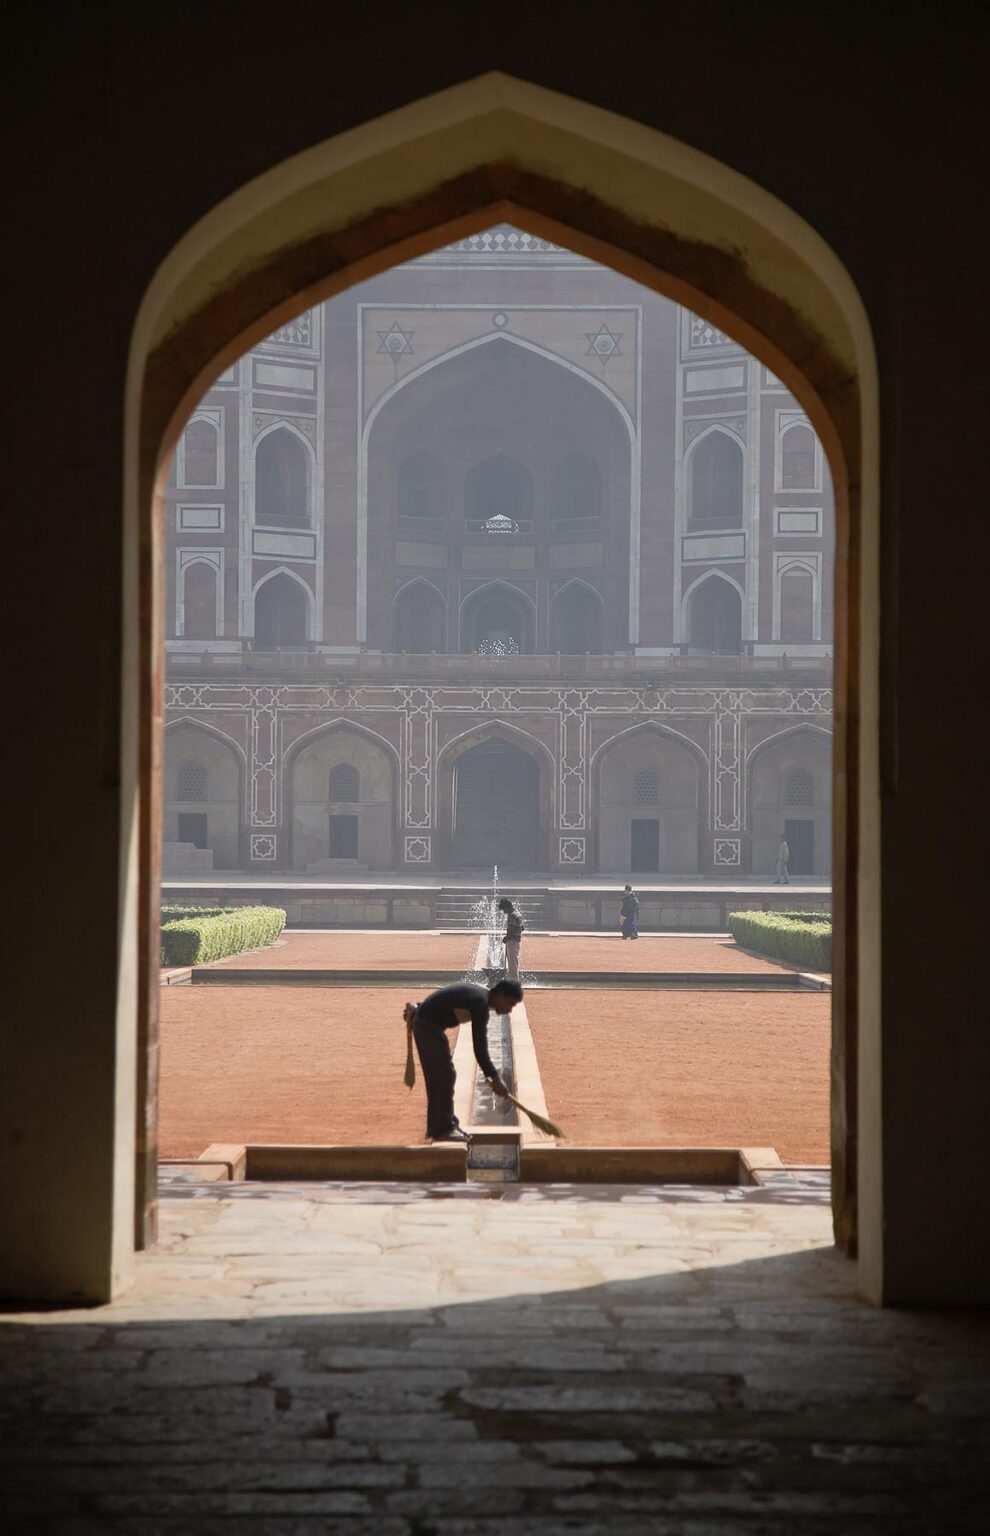 The West Gate and HUMAYUN'S TOMB, built in 1565, and a fine example of MUGHAL architecture - NEW DELHI, INDIA